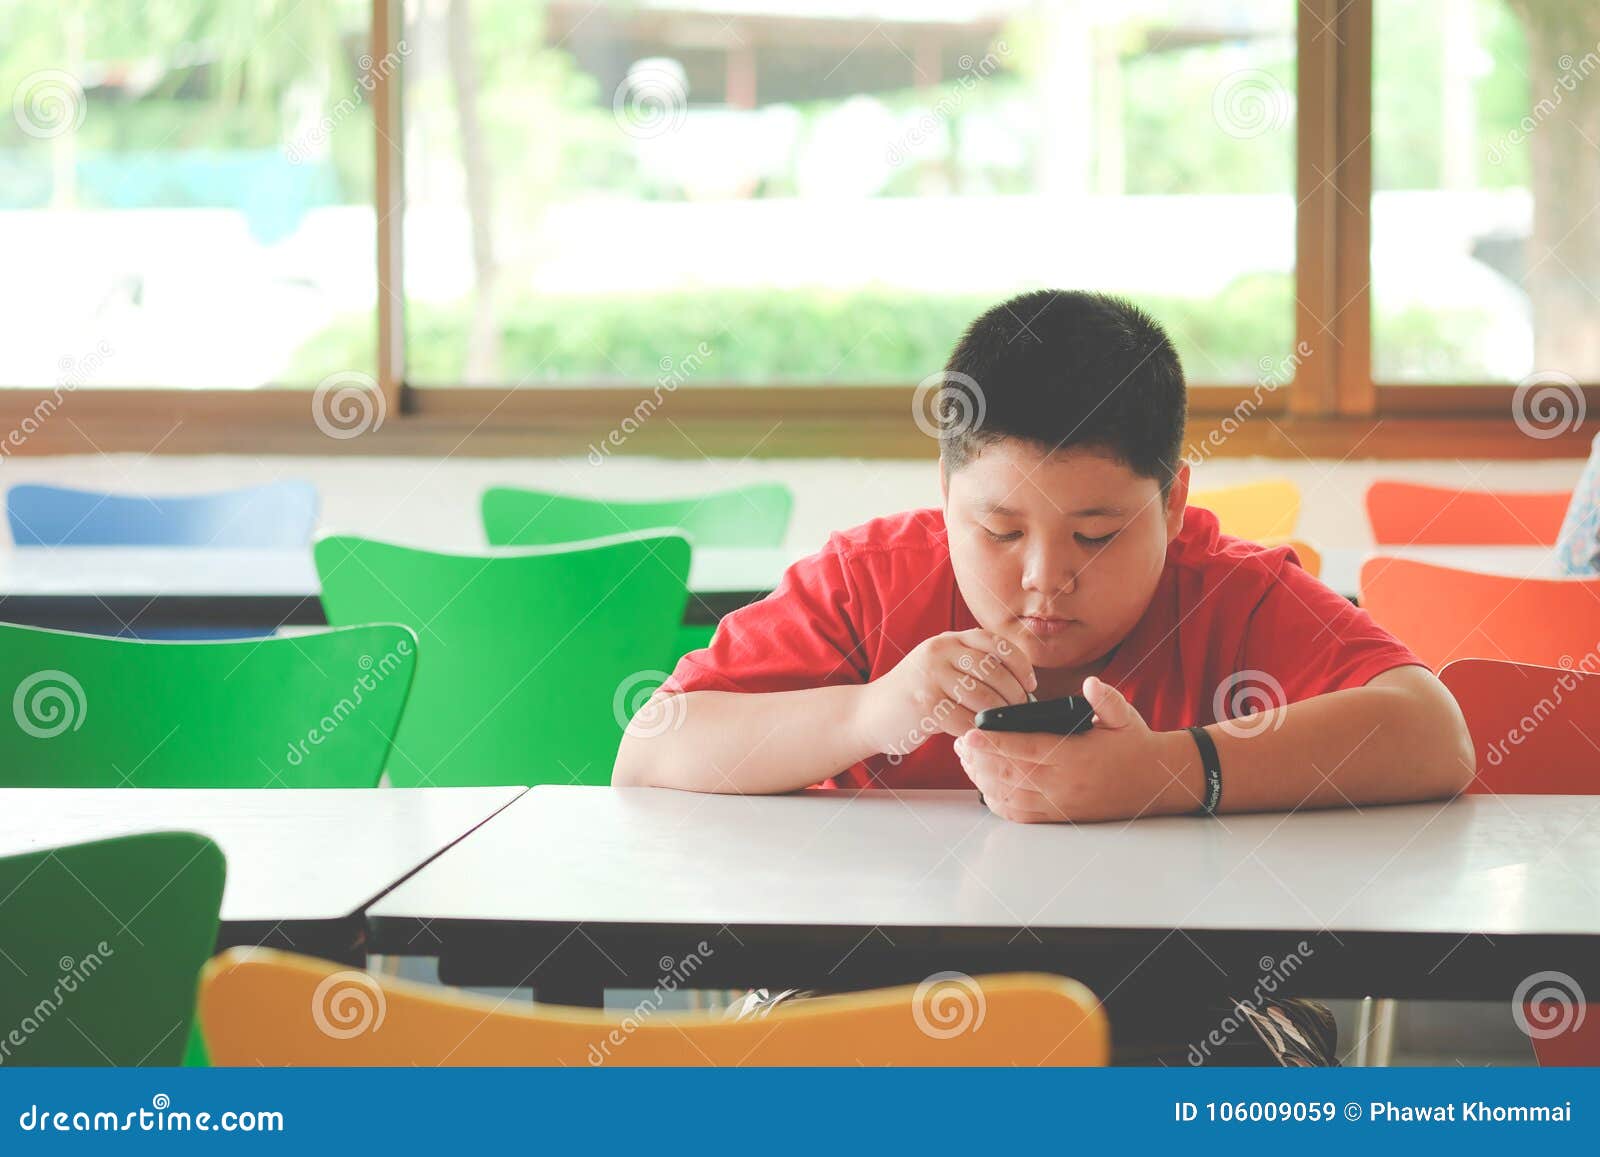 asian child boy are addictive playing tablet and mobile phones